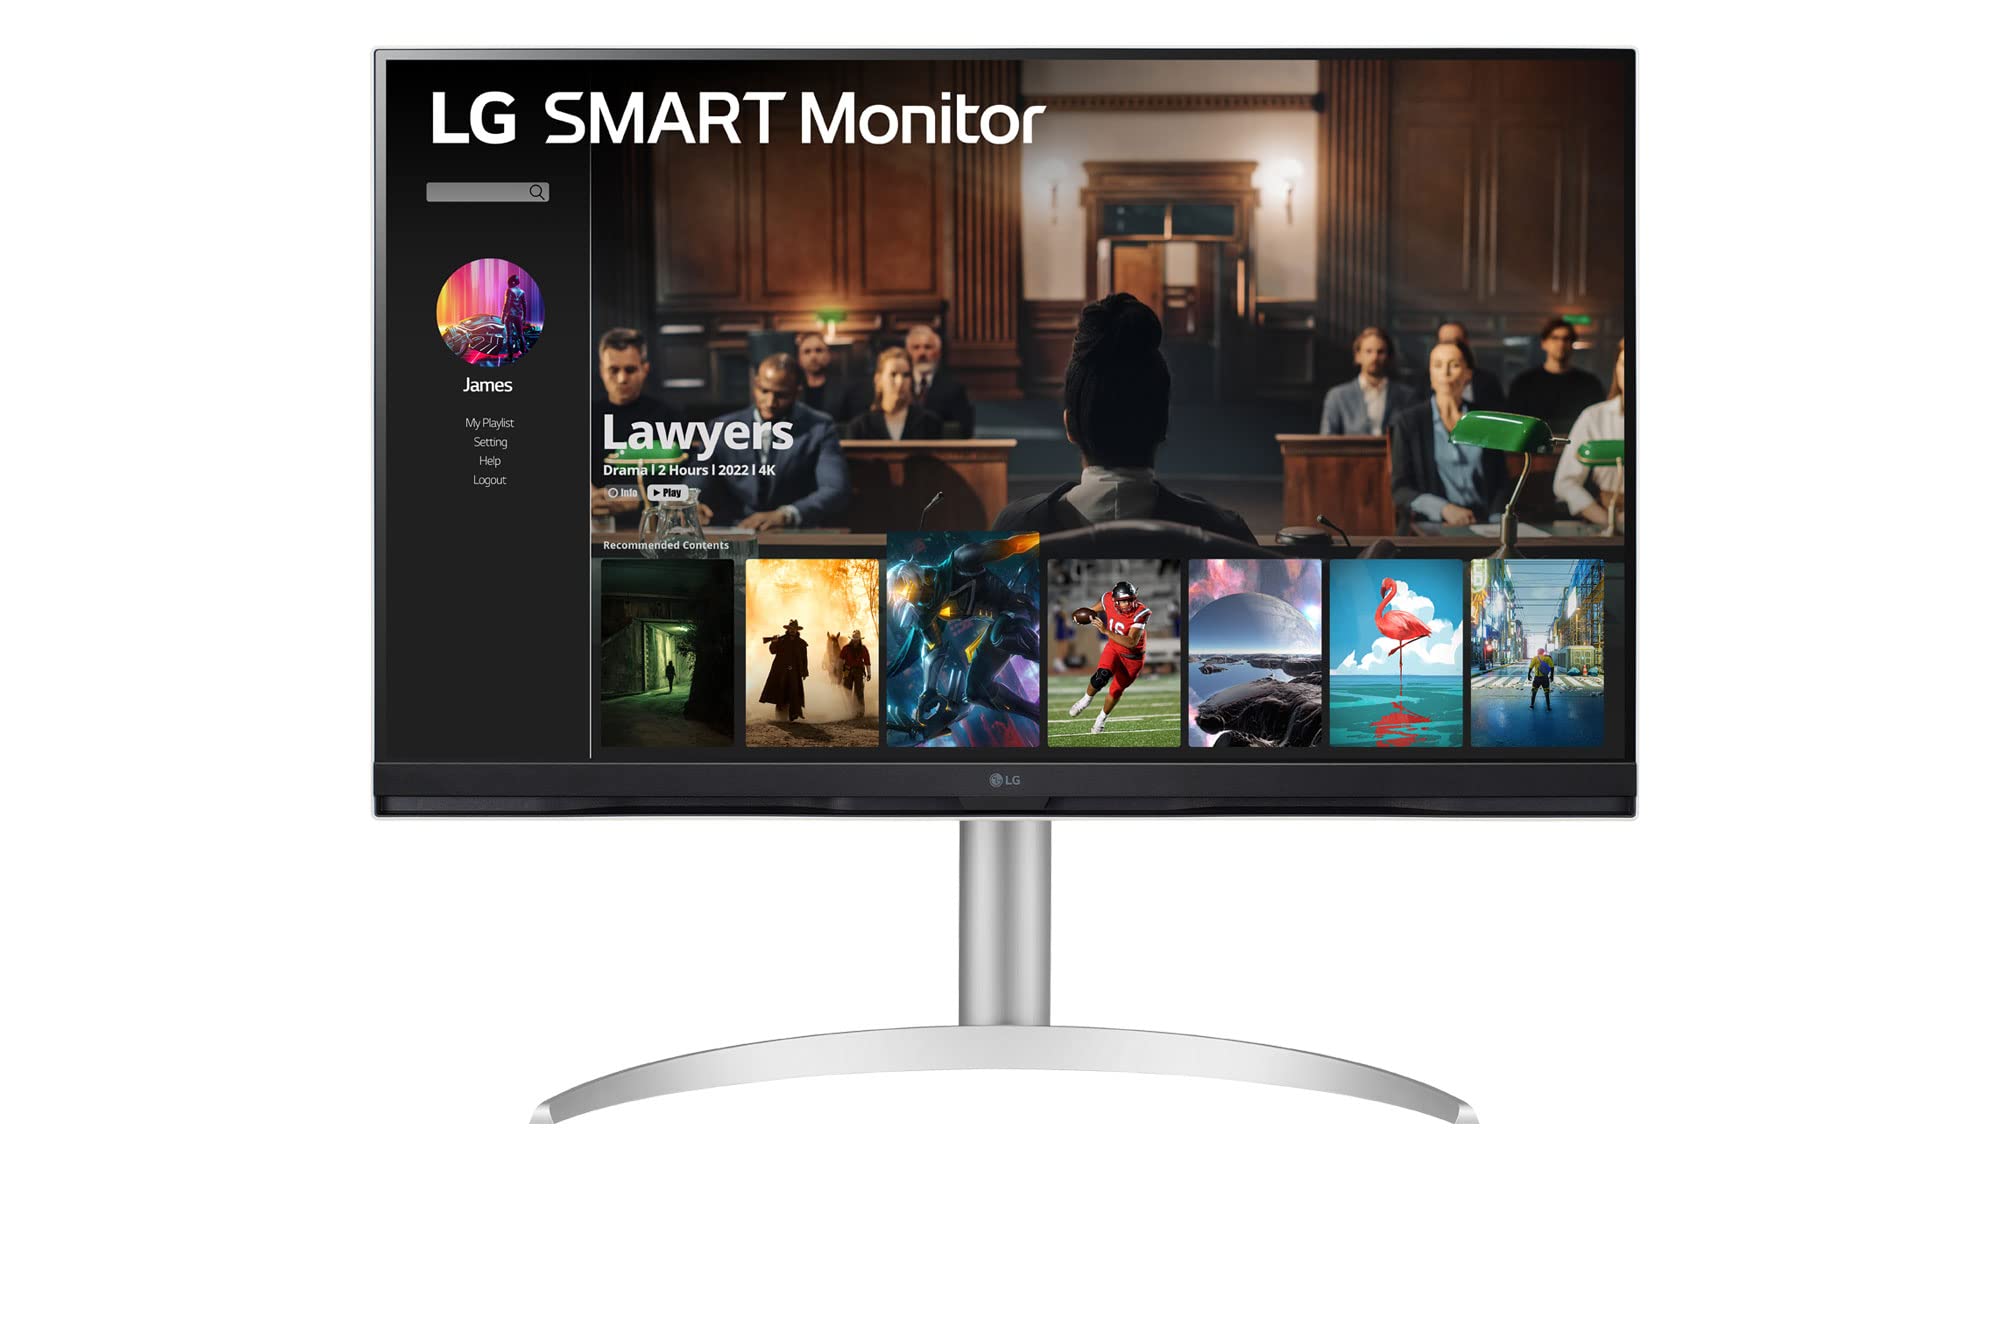 LG Smart Monitor (32SQ730S) - 32-Inch 4K UHD(3840x2160) Display, webOS Smart Monitor, ThinQ Home, Magic Remote, USB Type-C™, 2x5W Stereo Speakers, AirPlay 2, Screen Share, Bluetooth,Silver